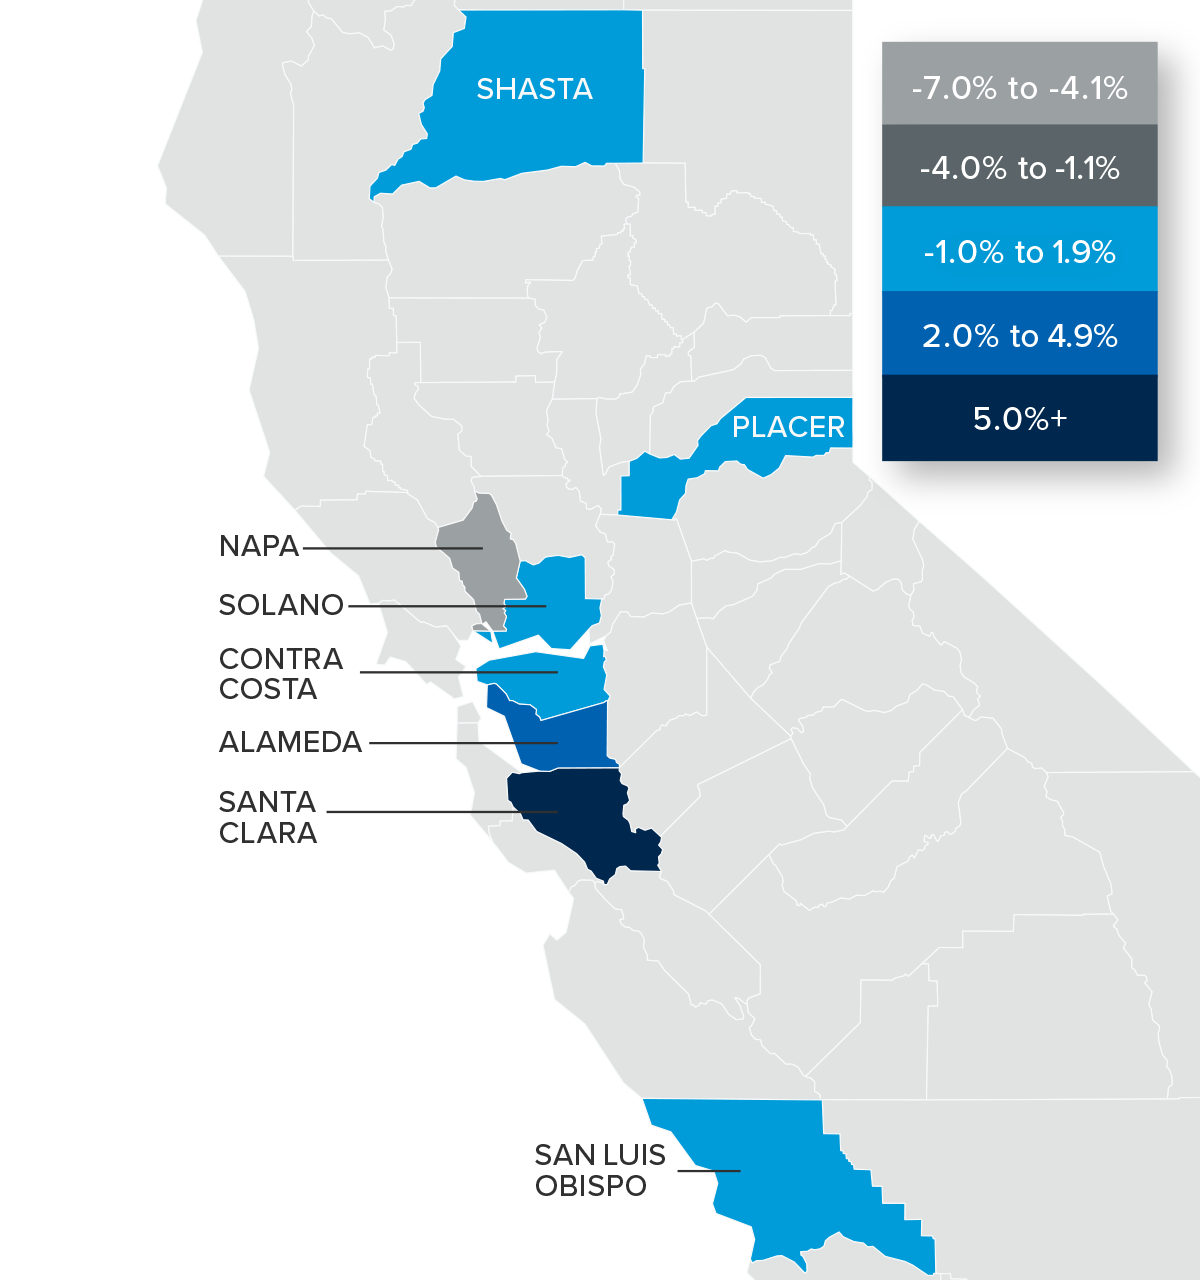 A map showing the real estate home prices percentage changes for various counties in Northern California. Different colors correspond to different tiers of percentage change. Santa Clara came in above 5% and are represented in the corresponding navy color. Alameda came in the 2 to 4.9% range. Shasta, Placer, Solano, Contra Costa, and San Luis Obispo Counties were in the -1 to 1.9% range. Napa was in the -7 to -4.1% range and is represented in the light grey color on the map. 